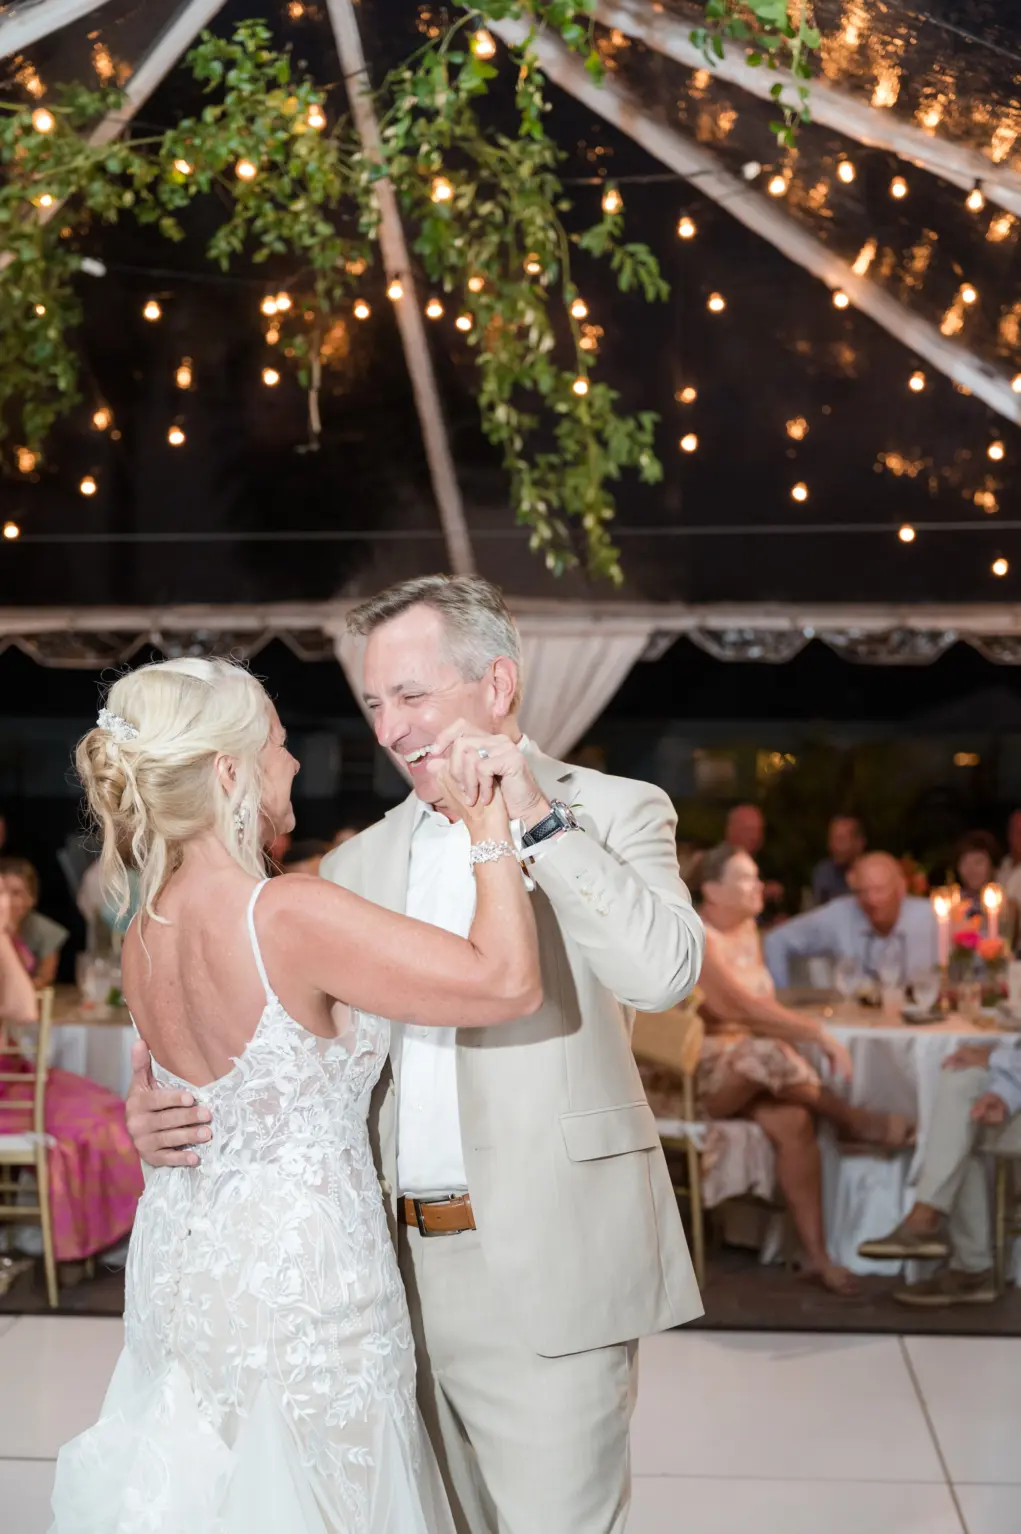 Bride and Groom First Dance in Tented Reception Inspiration Portrait | Tampa Wedding DJ Graingertainment